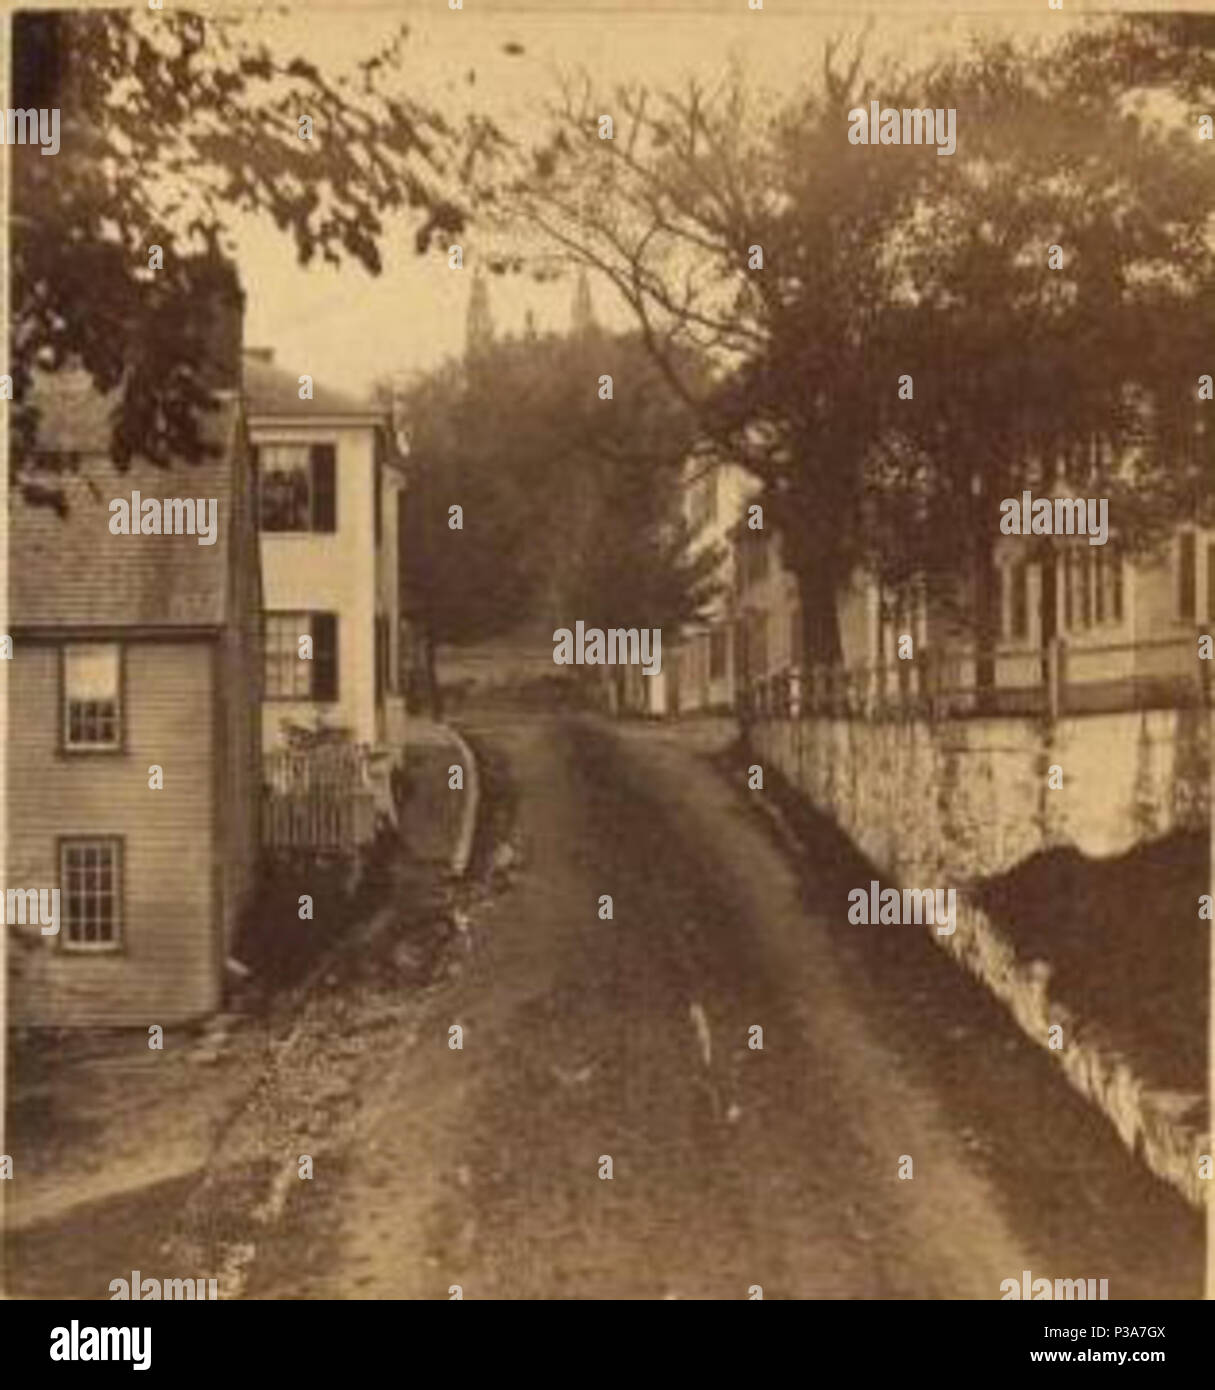 . Leyden Street--first street laid out by the Pilgrims. Alternate Title: Plymouth series.  Coverage: 1865?-1905?. Source Imprint: 1865?-1905?. Digital item published 9-15-2005; updated 2-12-2009. 168 Leyden Street--first street laid out by the Pilgrims, by C. H. Rogers Stock Photo